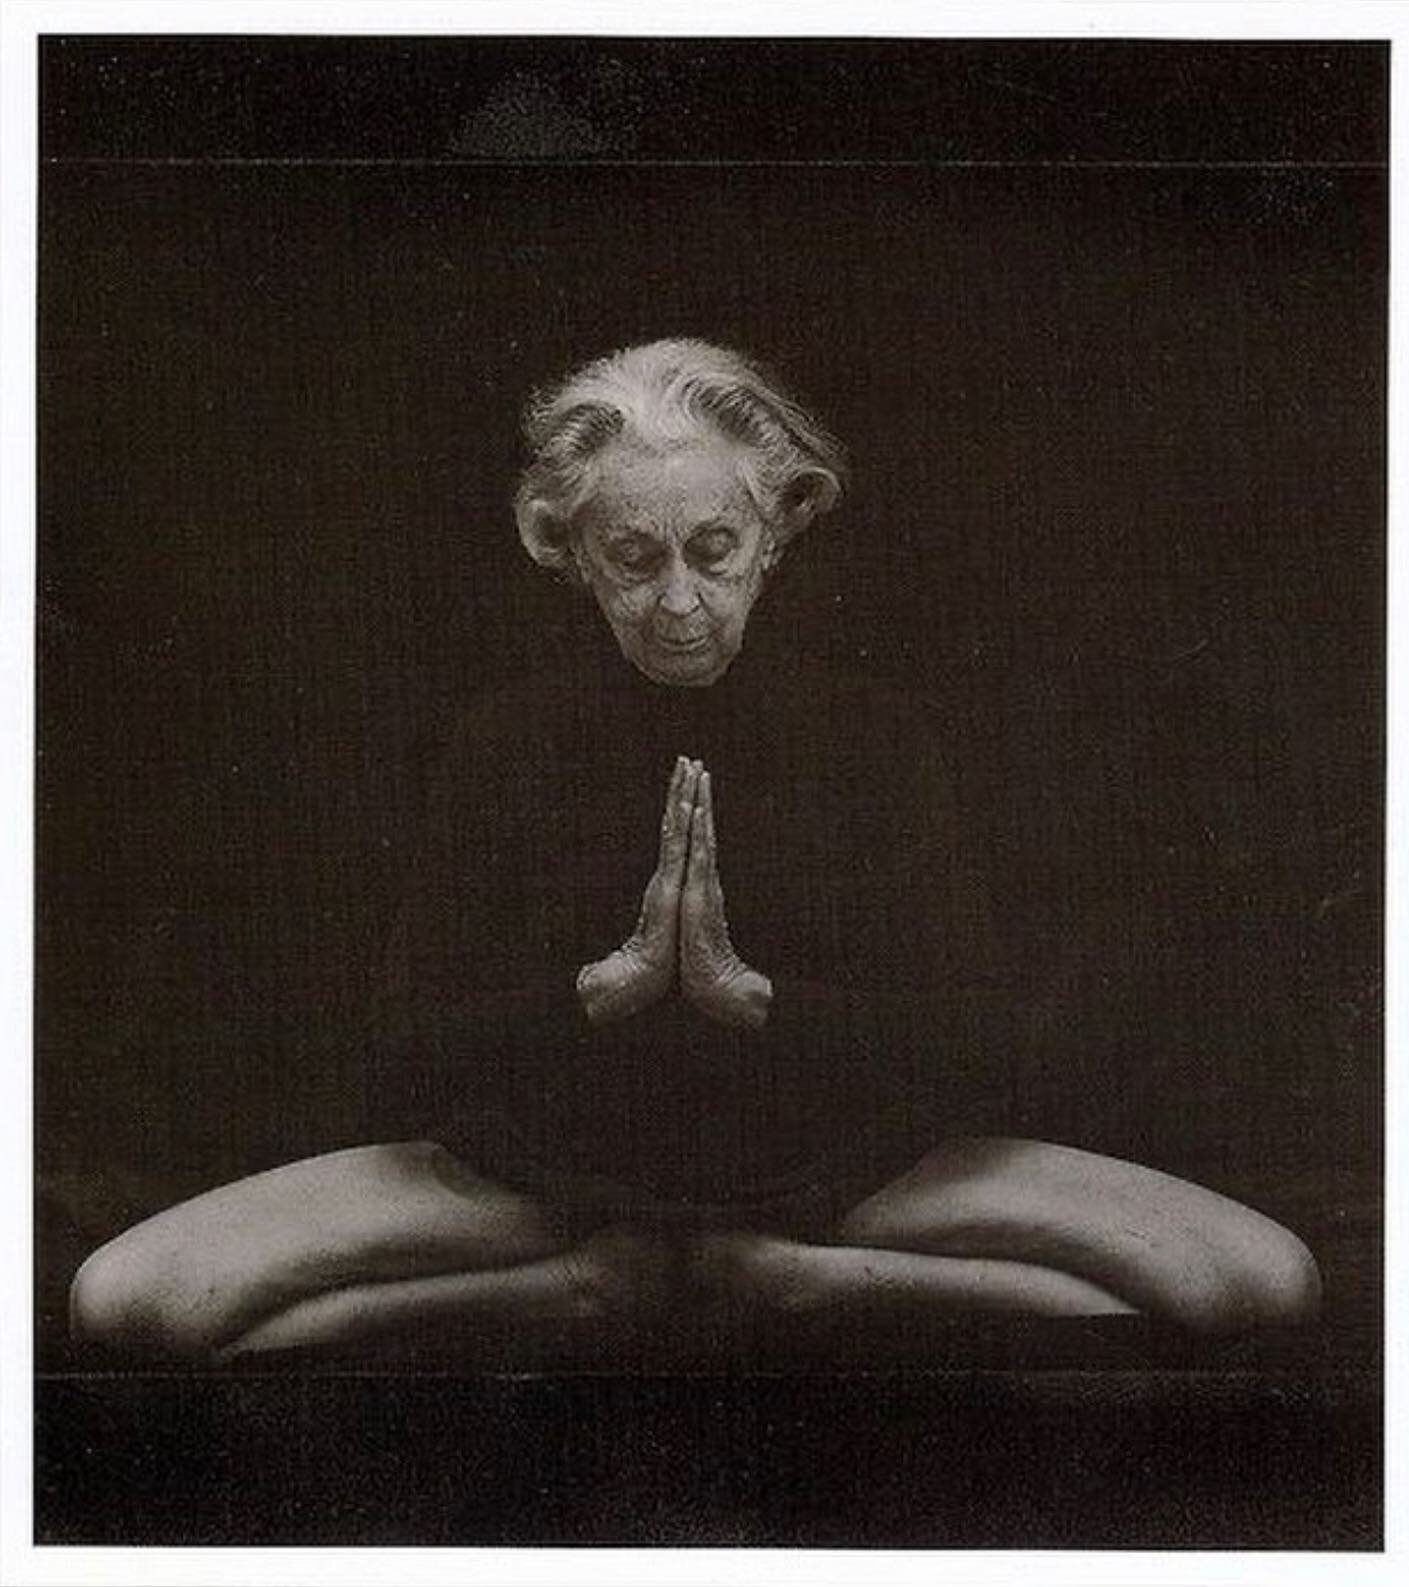 Repost @natural__woman

The great Vanda Scaravelli, student of J Krishnamurti, BKS Iyengar, TKV Desikachar, and her own spine&hellip;
Embodied 1908-1999

&ldquo;Understanding leads to independence and to freedom.&rdquo;

&ldquo;Teaching is not an imp